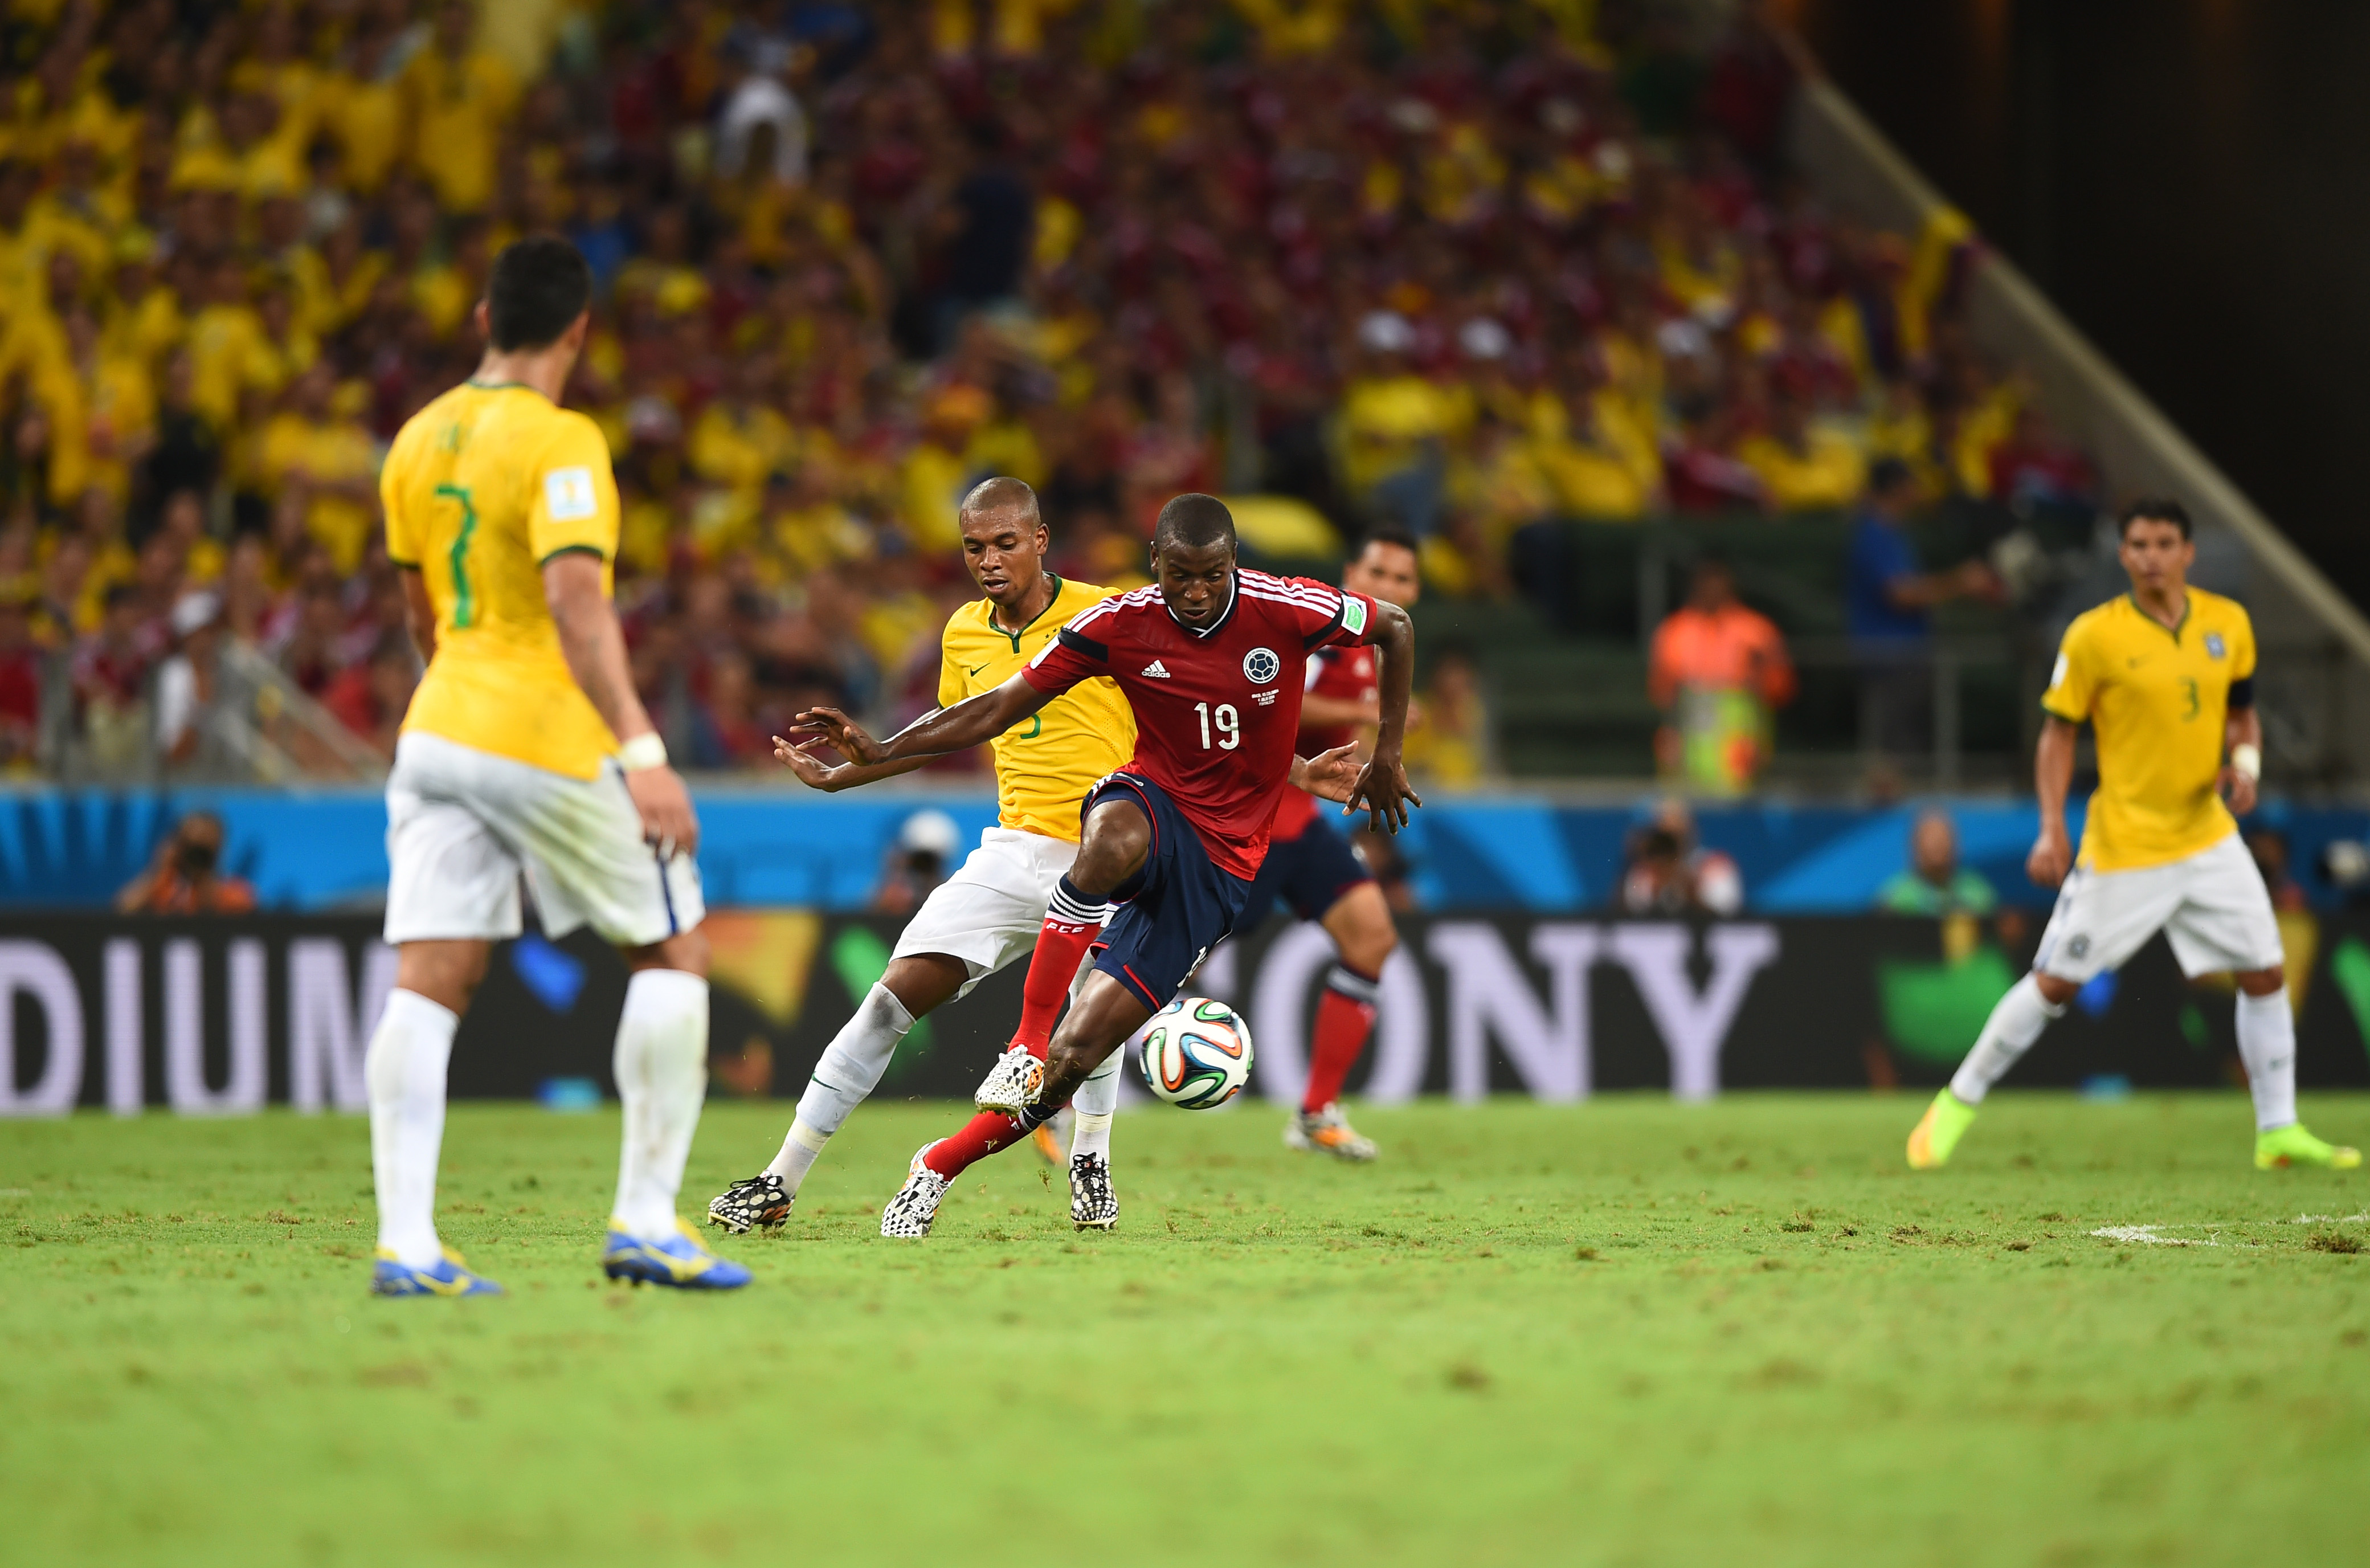 Relive Brazil vs. Colombia #FIFAWorldCup - Philippine Canadian Inquirer